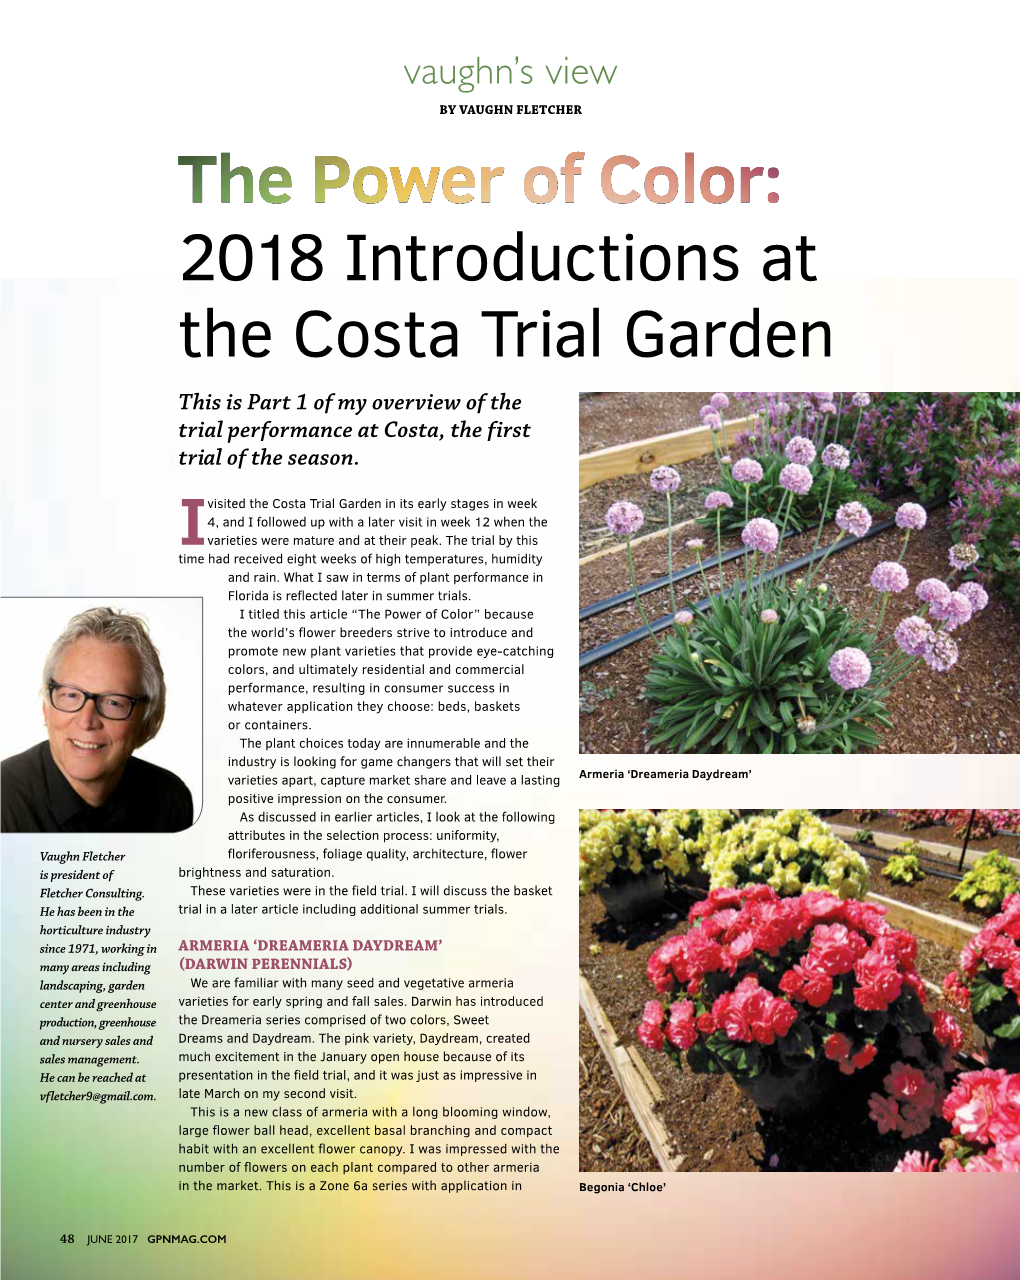 2018 Introductions at the Costa Trial Garden This Is Part 1 of My Overview of the Trial Performance at Costa, the First Trial of the Season